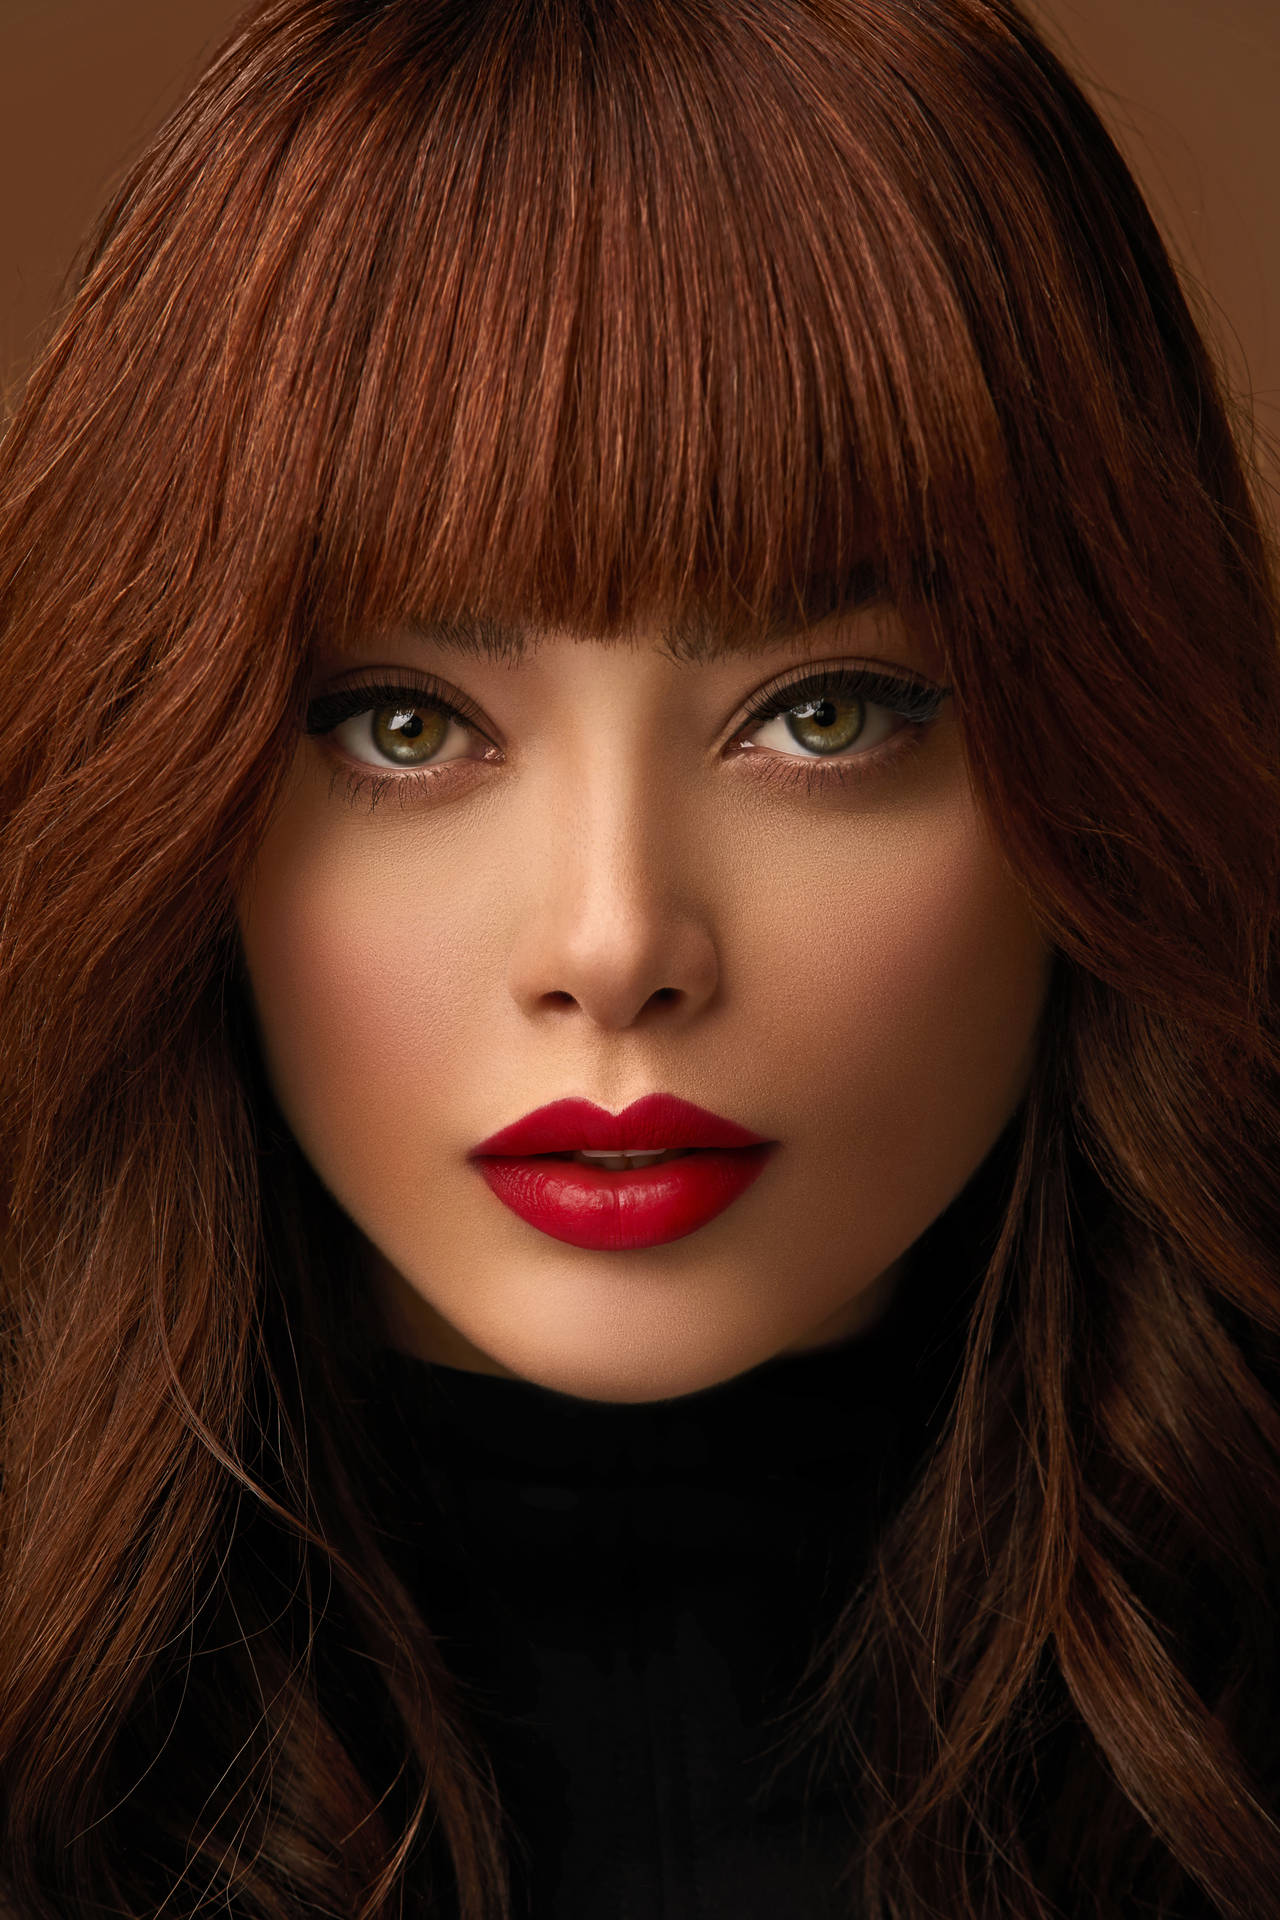 Caption: Striking Beauty: Red-haired Woman with a Stunning Face Wallpaper